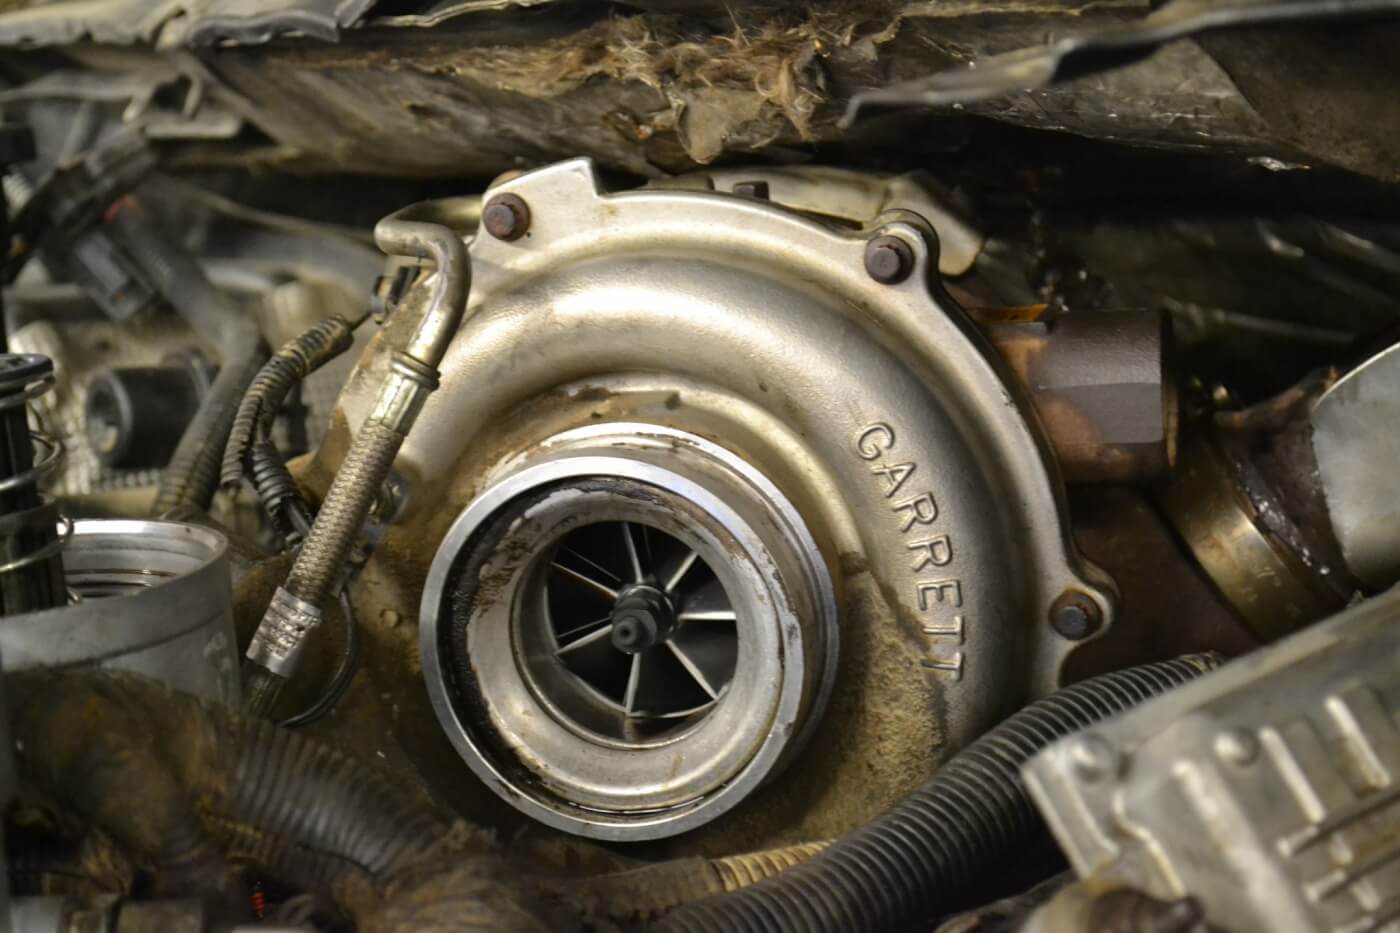 Turbos can lead a hard life, as evidenced by this grime-covered unit tucked under the firewall. Still, due to their simplicity, outright failures aren't very common in most engines.